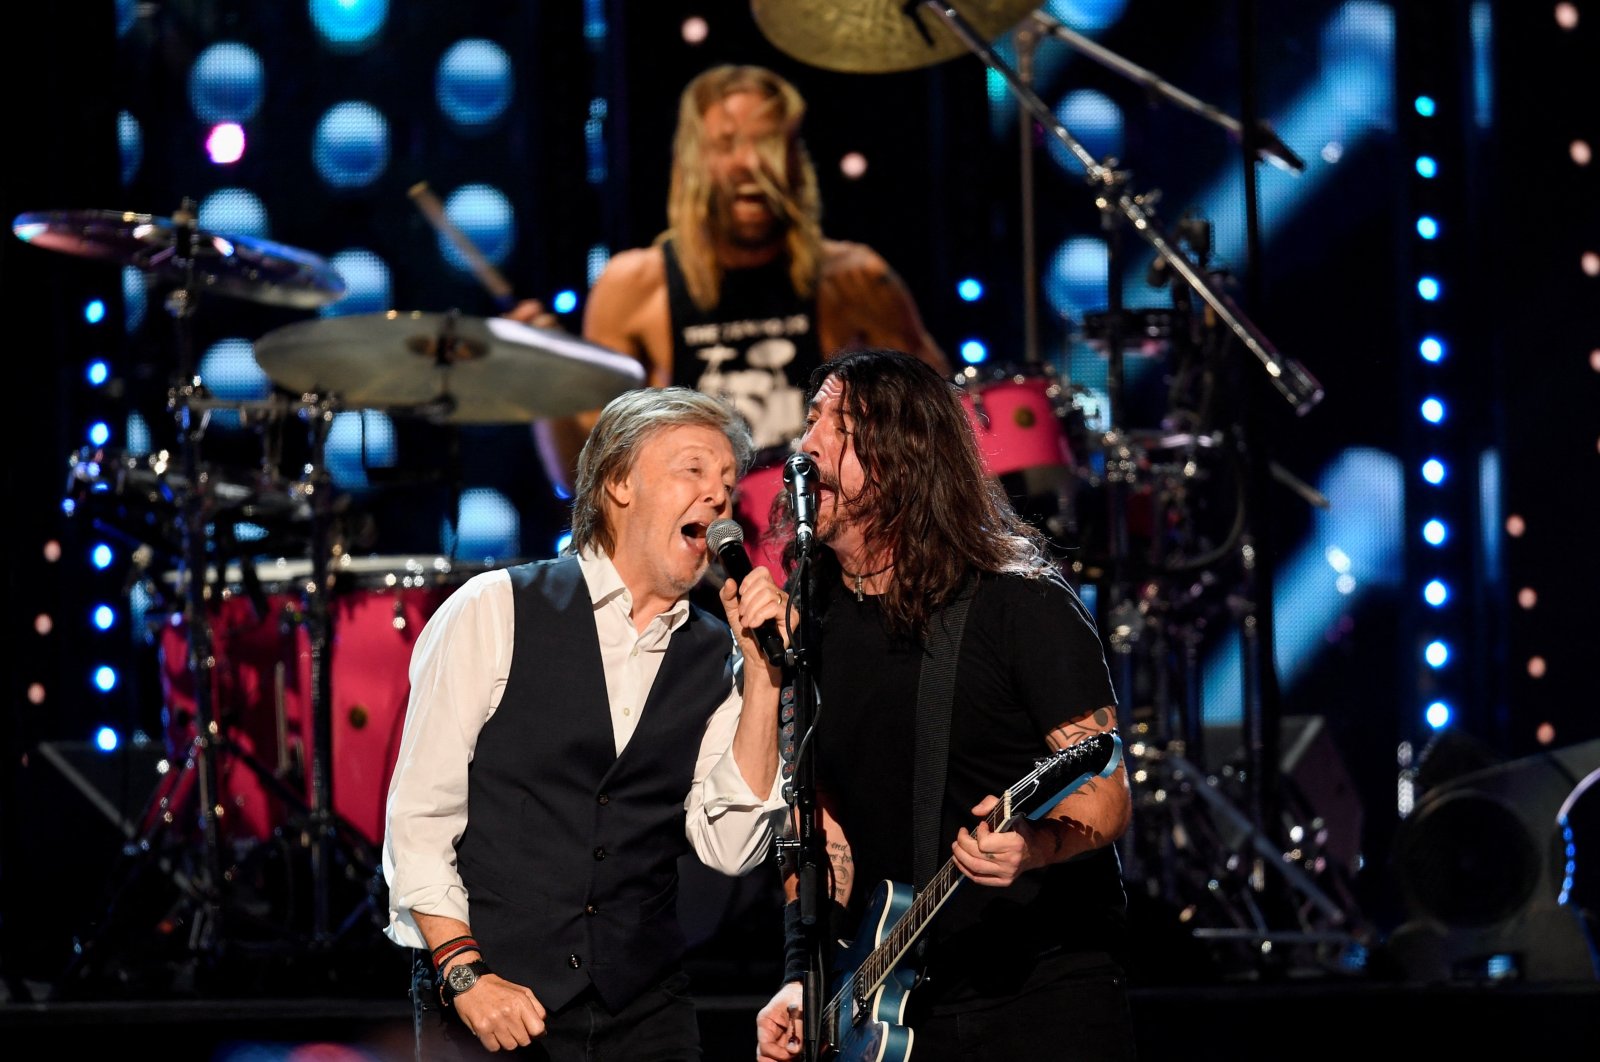 Sir Paul McCartney performs the Beatles song &quot;Get Back&quot; with the Foo Fighters after they were inducted into the Rock and Roll Hall of Fame in Cleveland, Ohio, U.S., Oct. 31, 2021. (REUTERS)